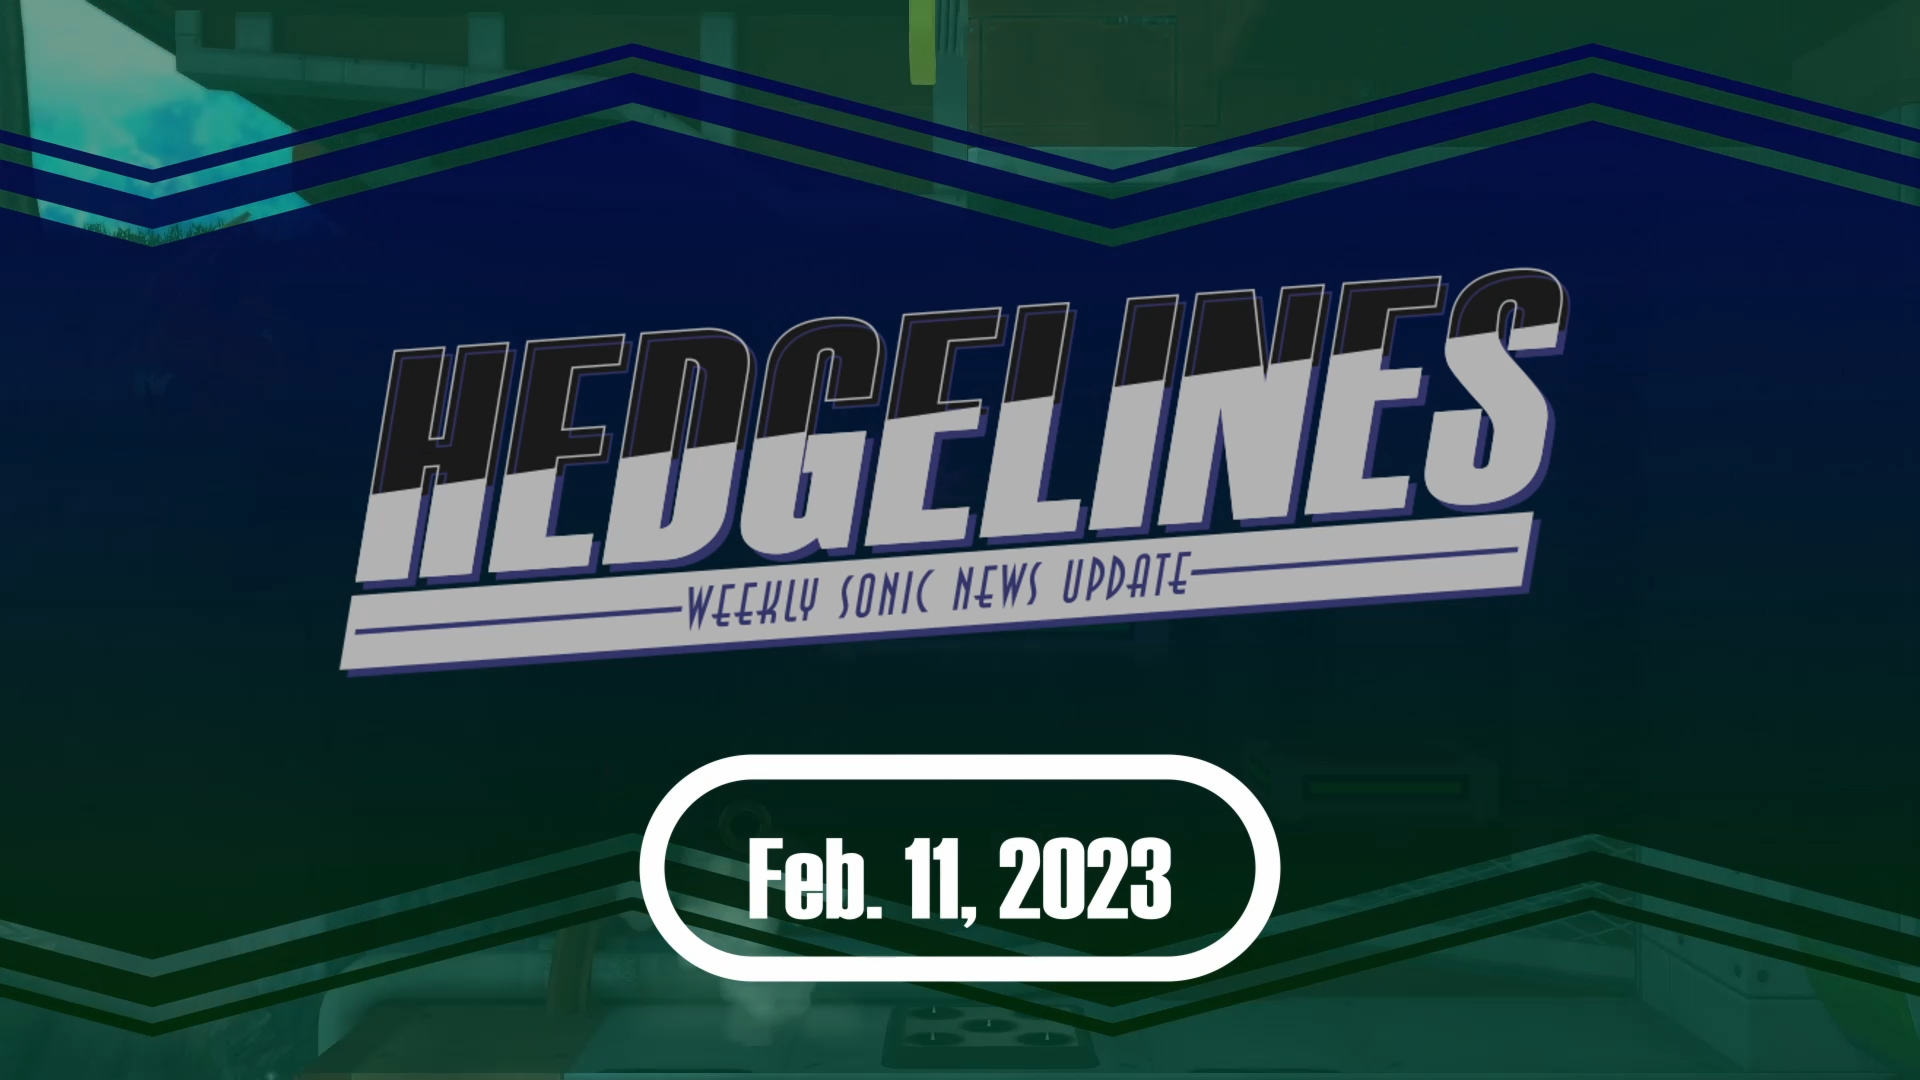 More information about "HedgeLines - Weekly News Recap - Feb. 11, 2023"